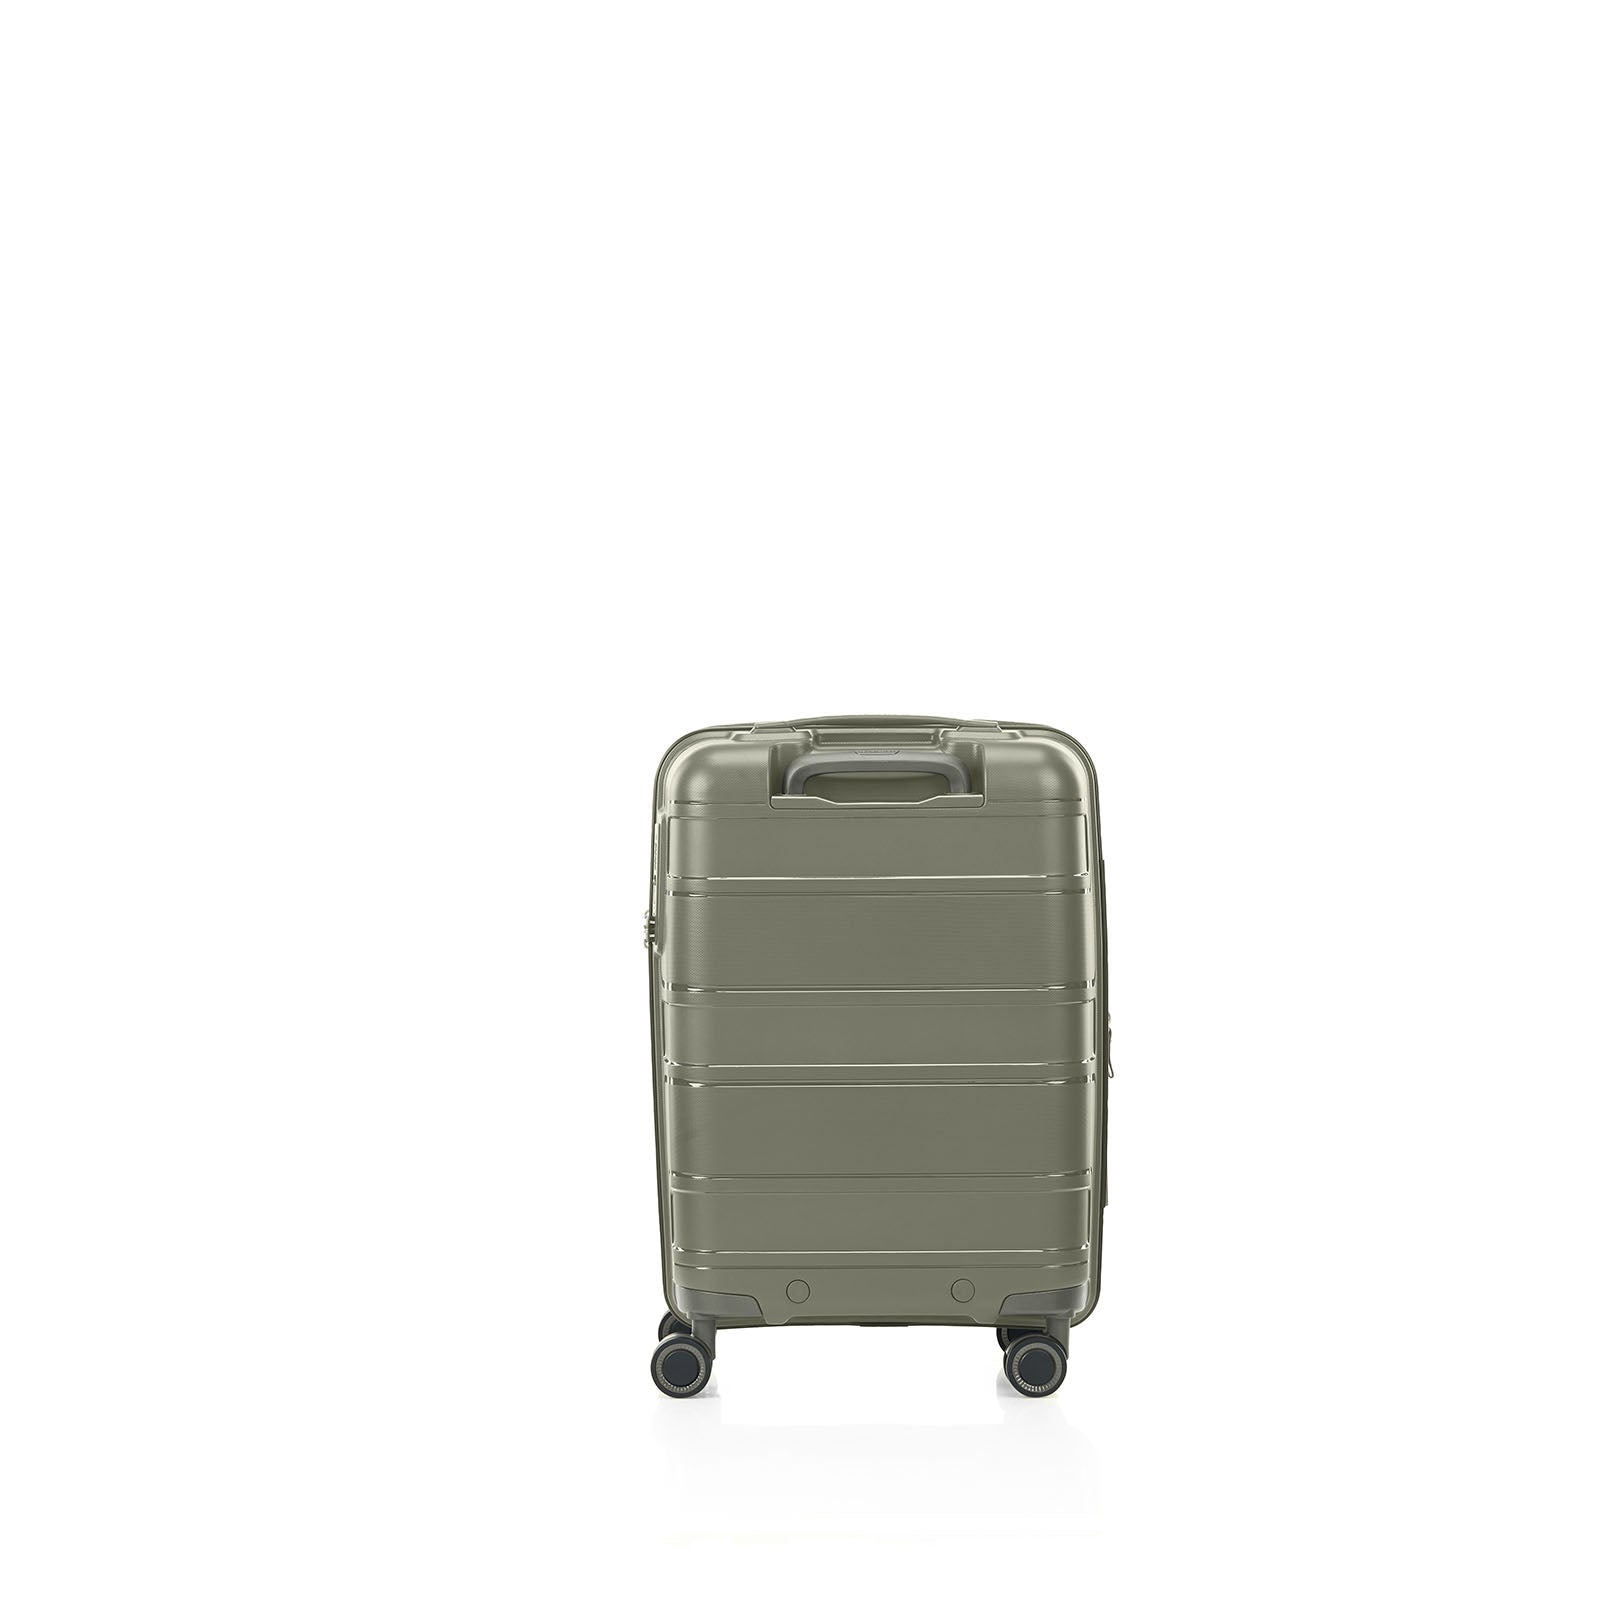 American-Tourister-Light-Max-55cm-Carry-On-Suitcase-Khaki-Back